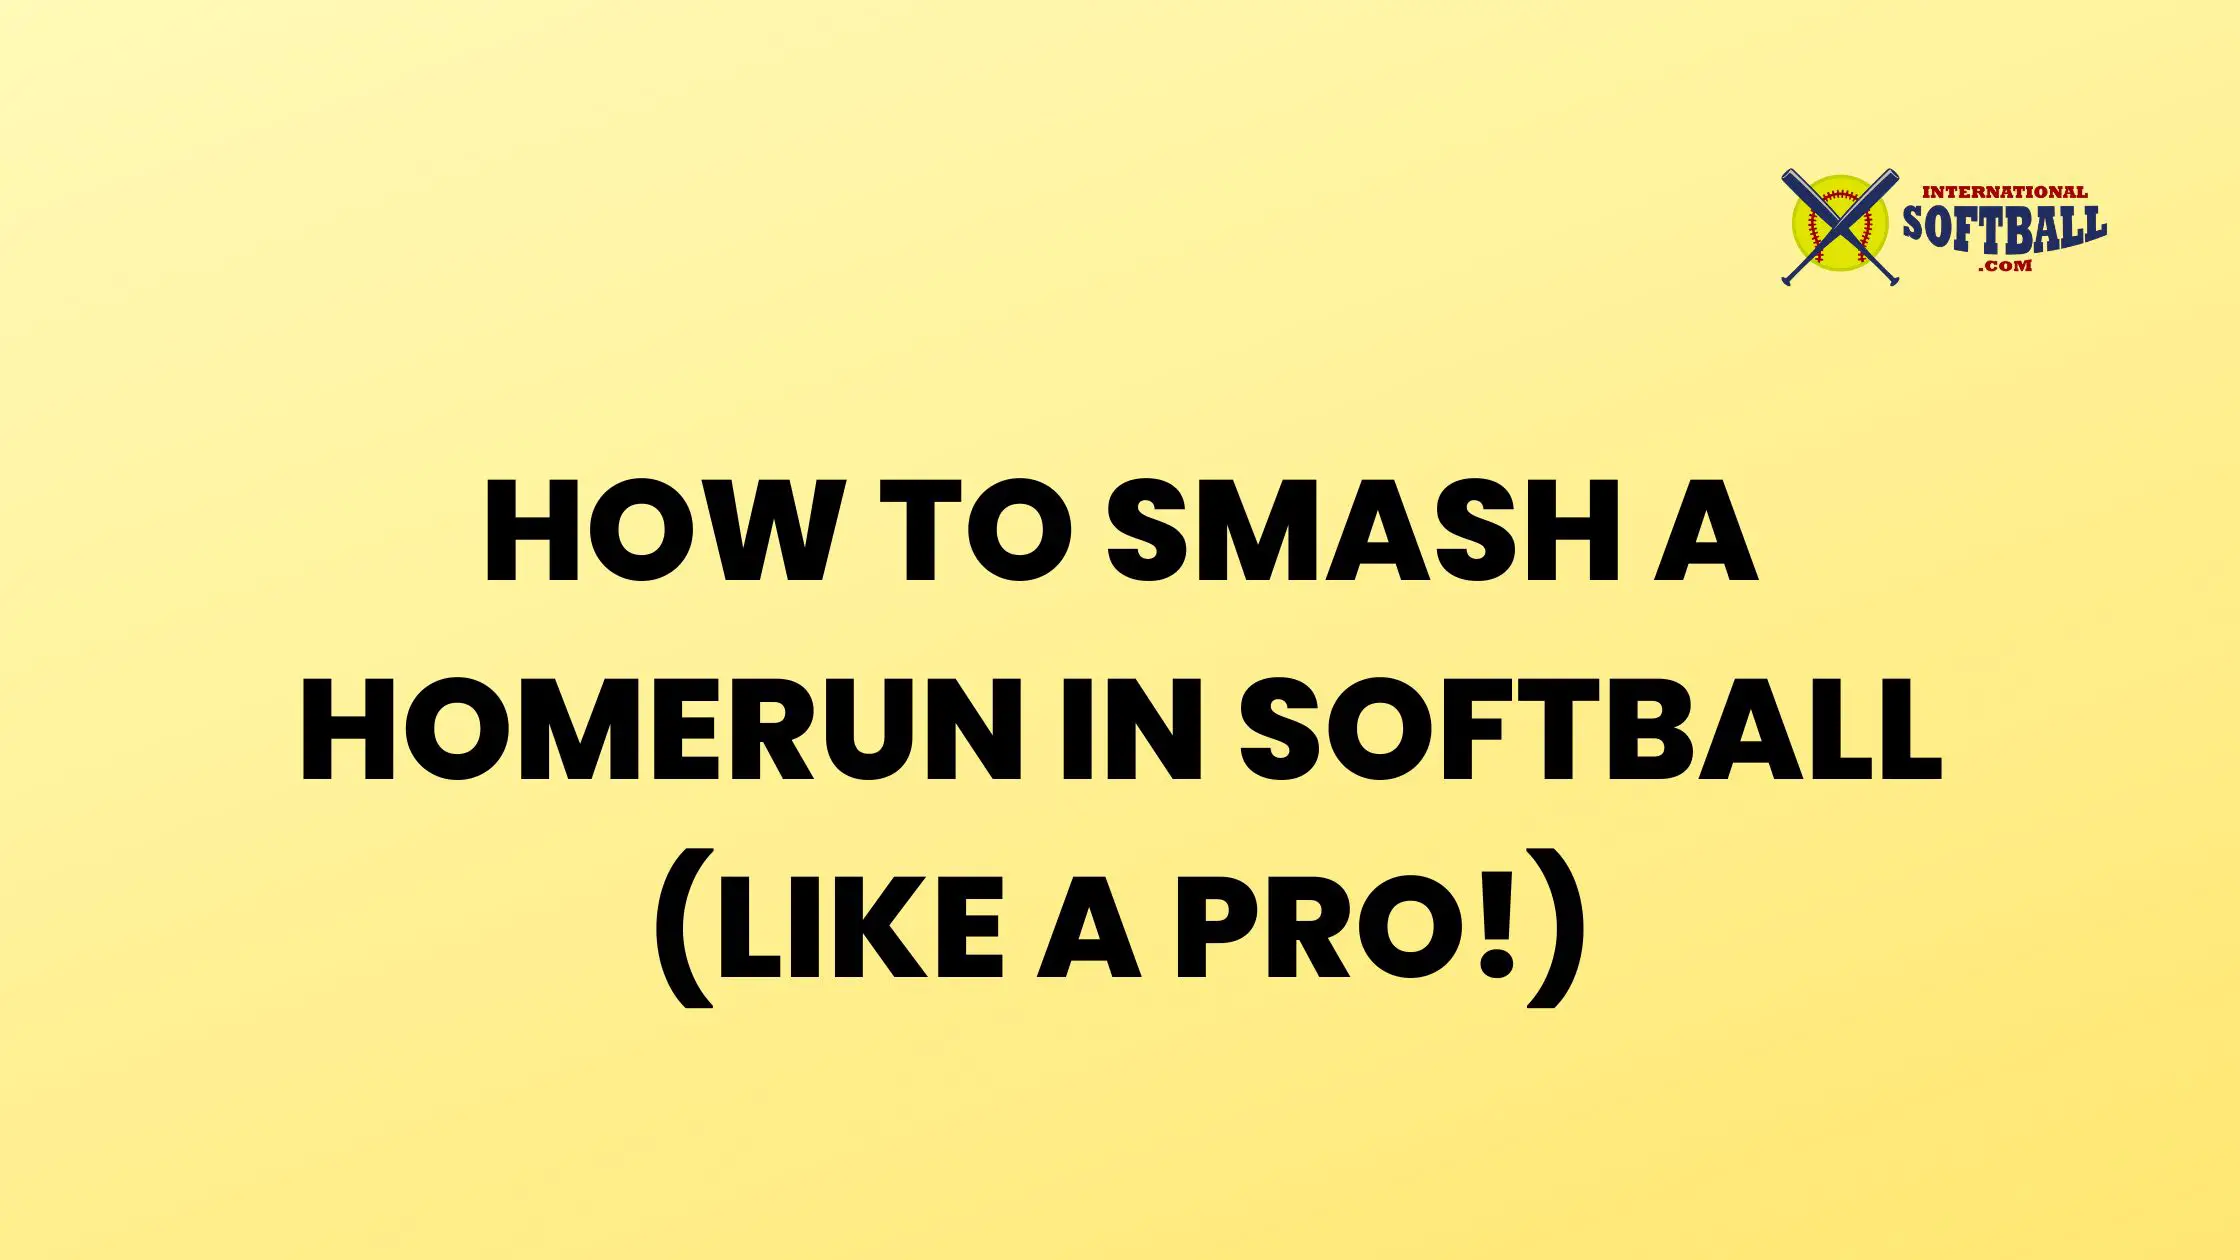 HOW TO SMASH A HOMERUN IN SOFTBALL (LIKE A PRO!)